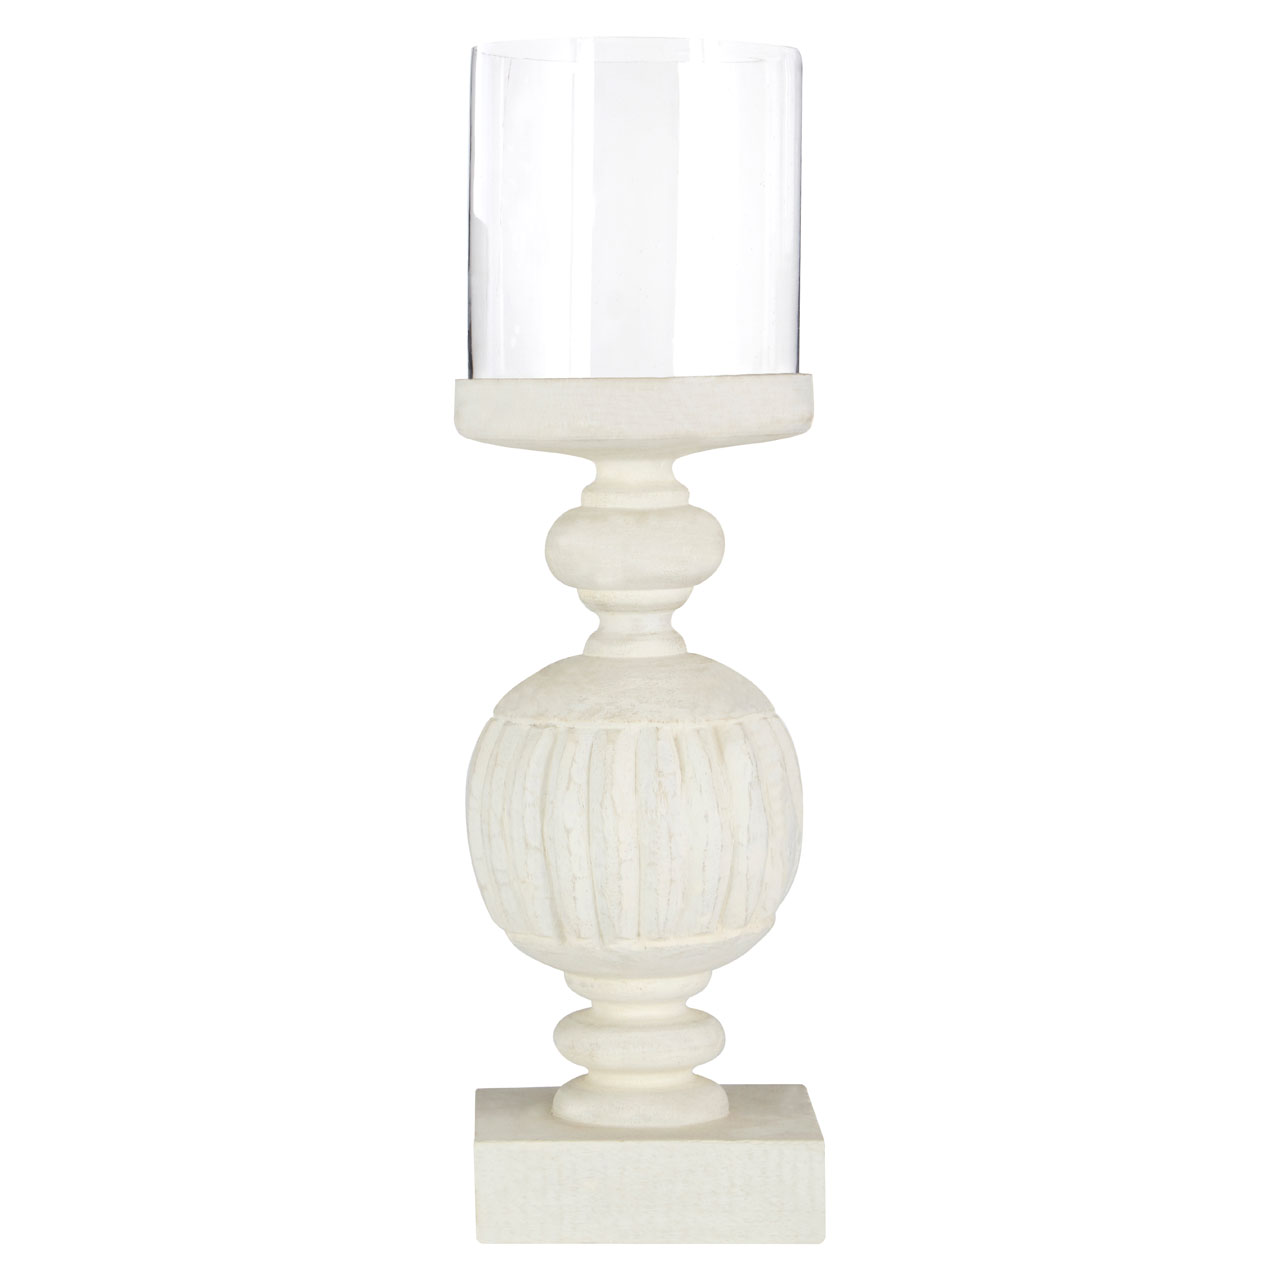 Prime Furnishing Complements Carved Candle Holder, White Wash